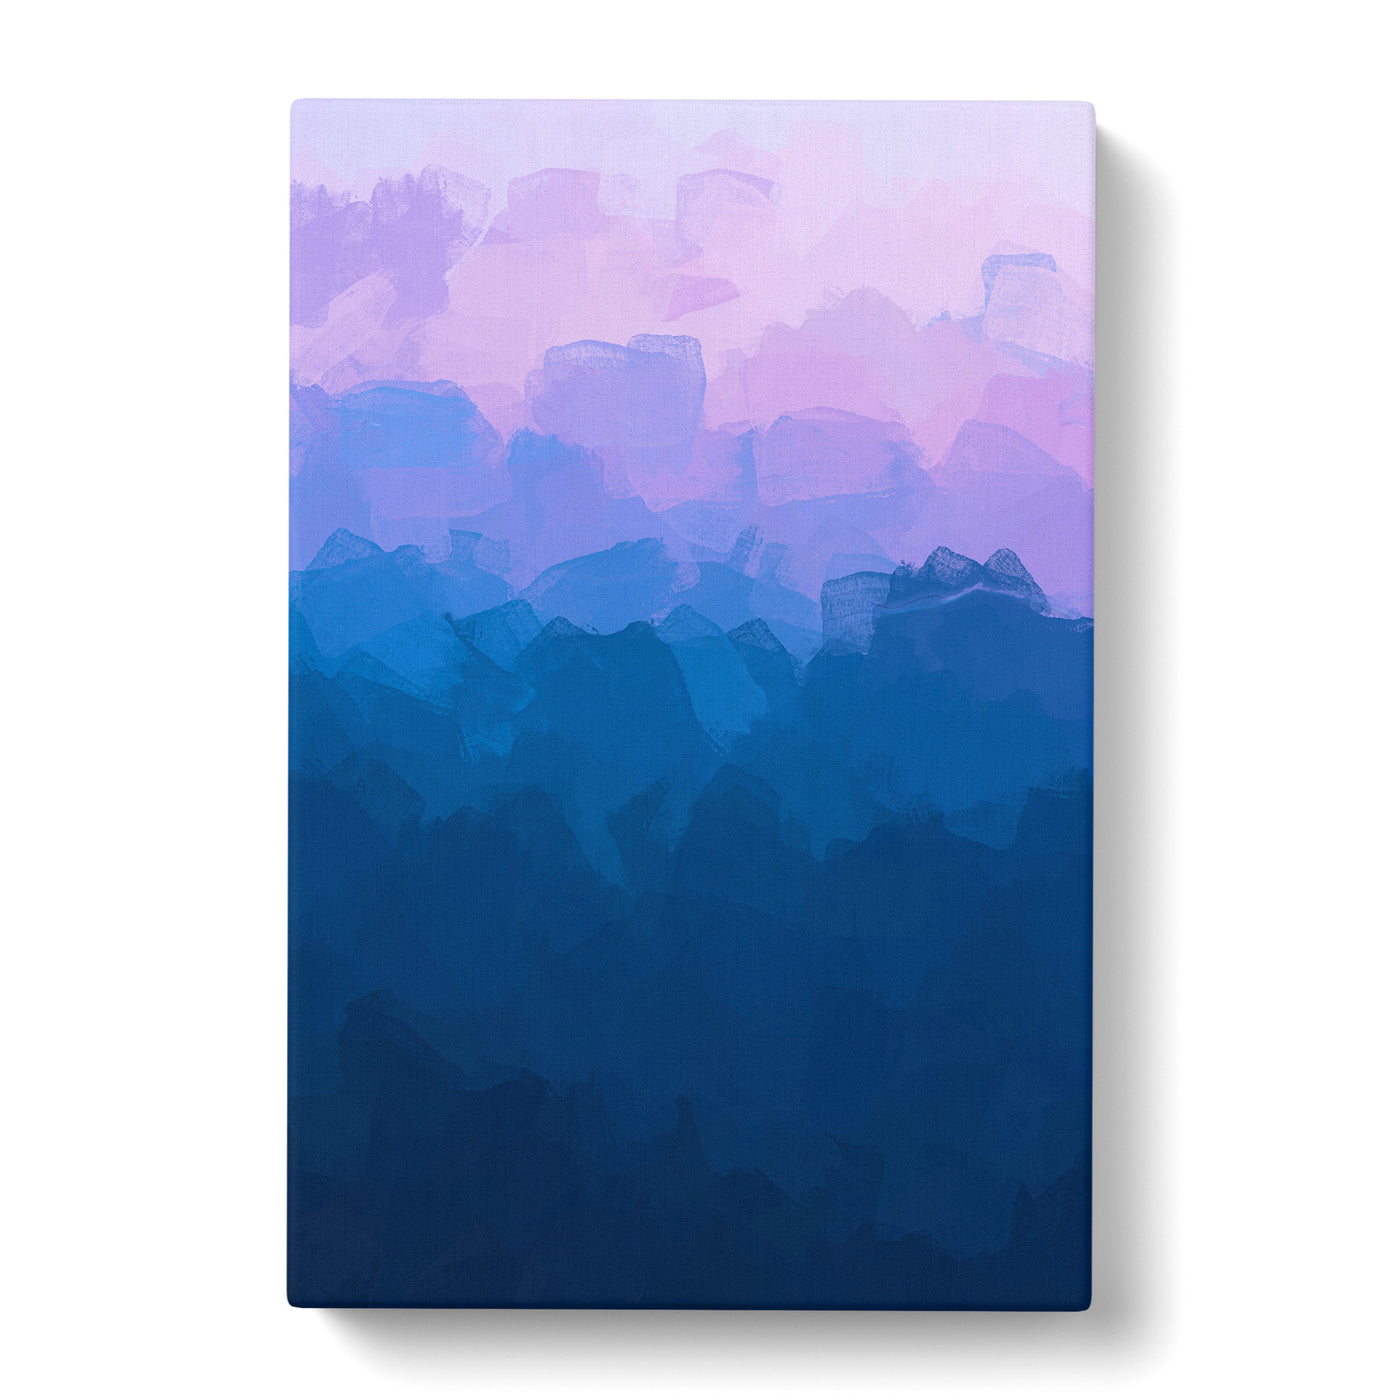 View Of A Mountain Range In Abstract Canvas Print Main Image